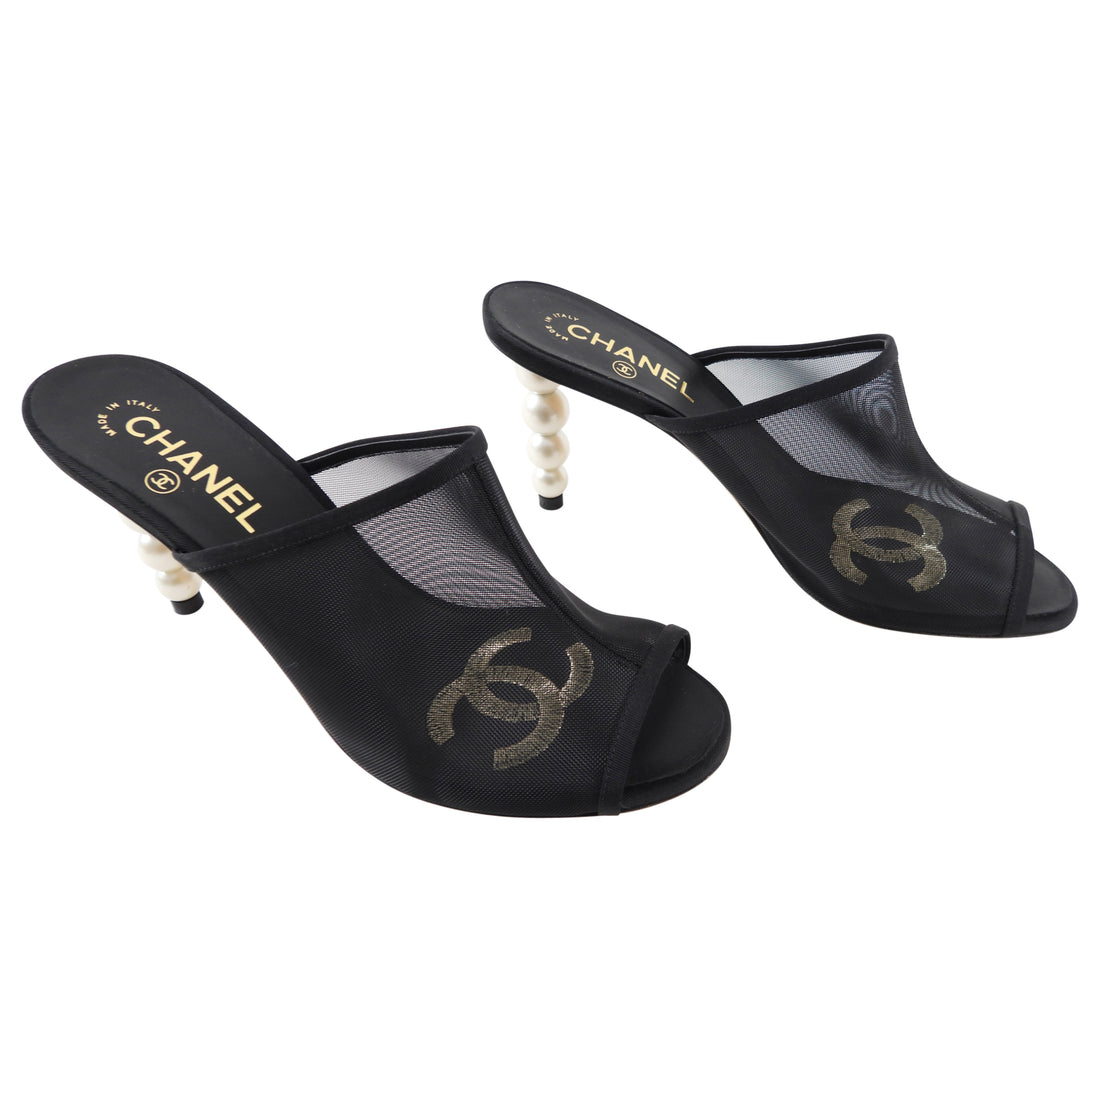 Chanel vintage shoes added online today in sizes 6 75  or come try in  store 126 chanelshoes   TAP this post for additional photos  Instagram